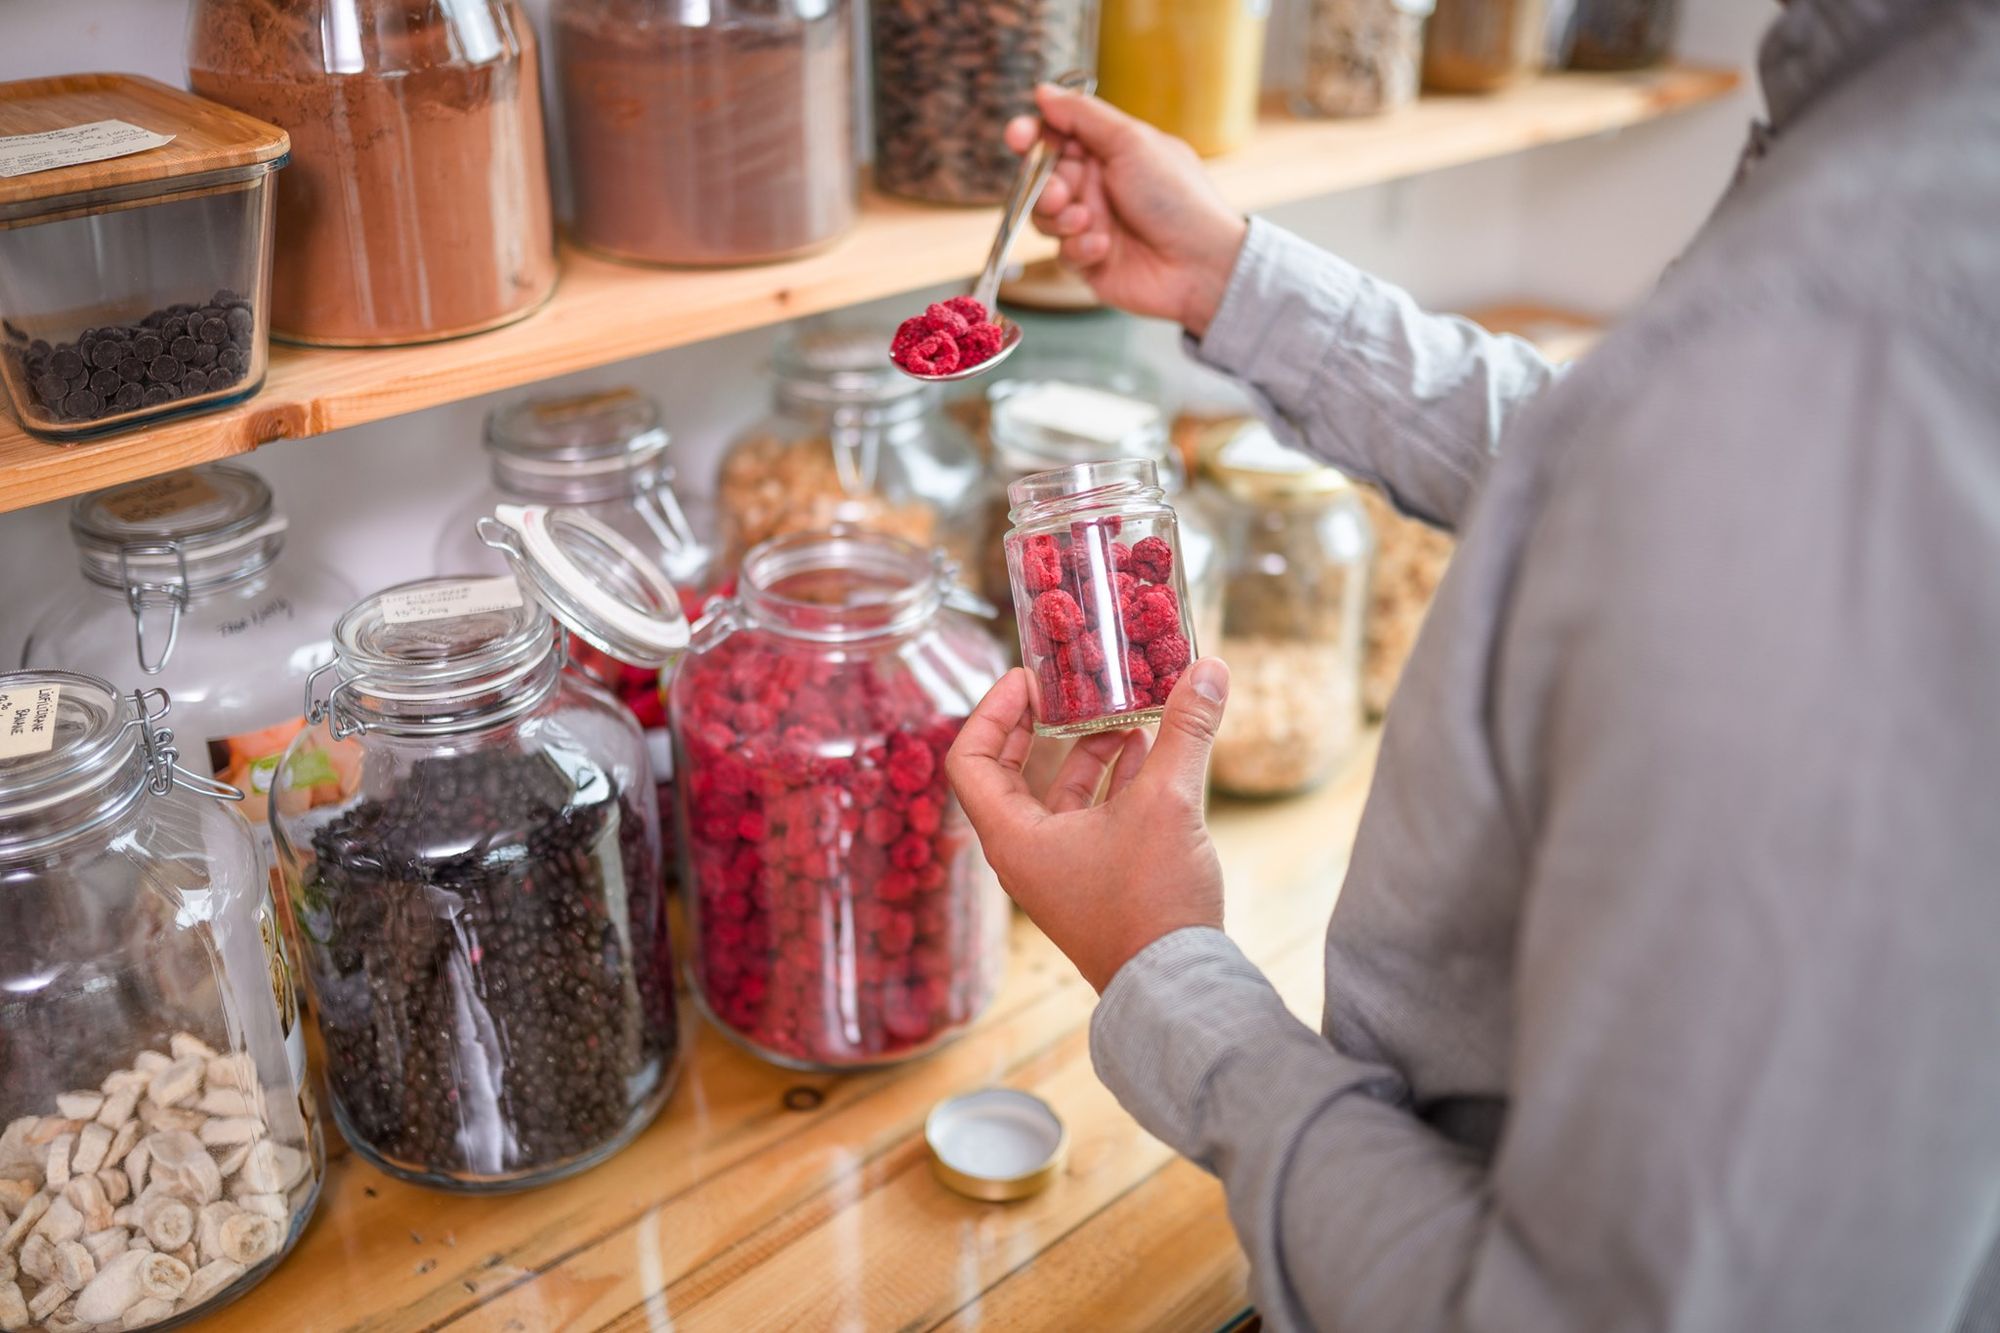 Shopping for the future—packaging-free stores in the region | TOP 5